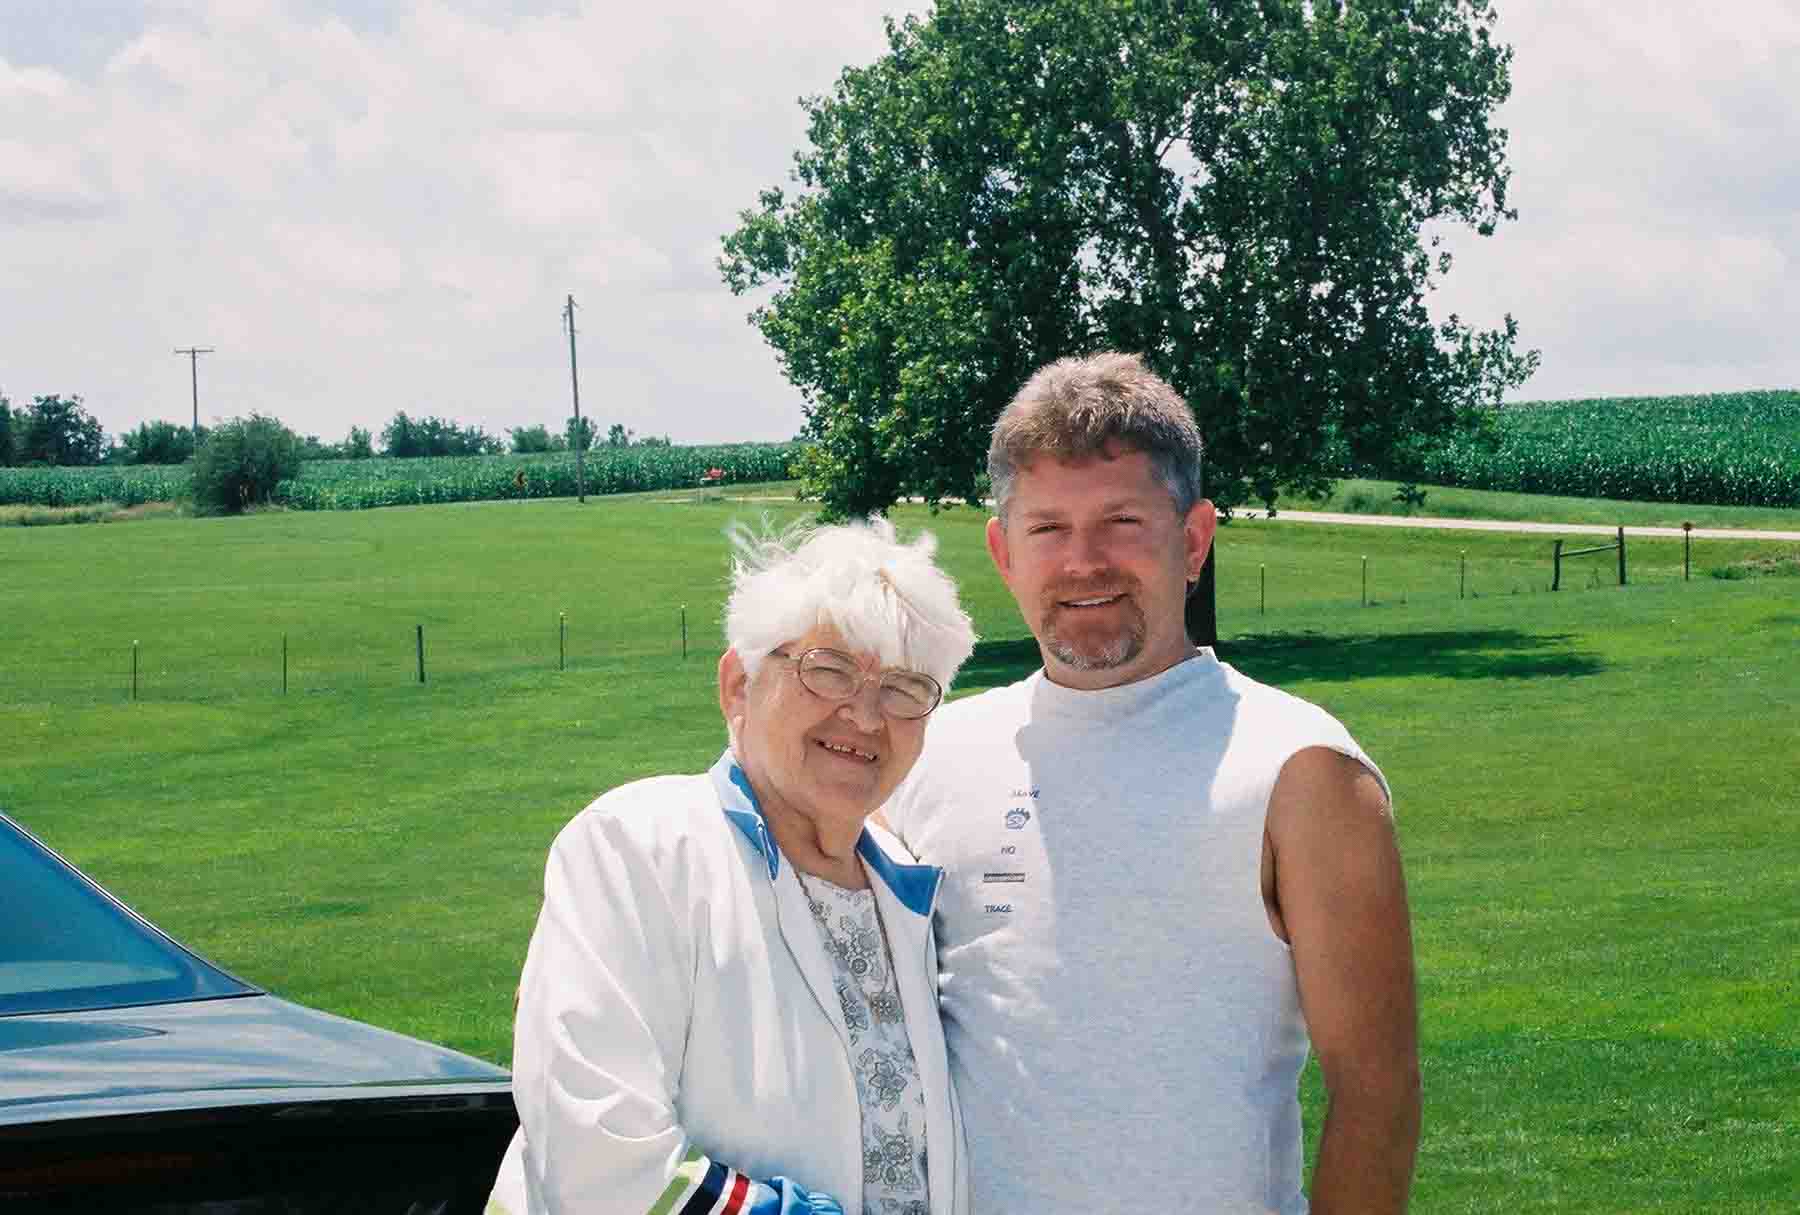 Paul Risner & Don's Aunt Evelyn Crabtree Risner.They came to visit while Julane was at the beach.
Source: DW Crabtree
Location: Librty, MO
Date: July 2004